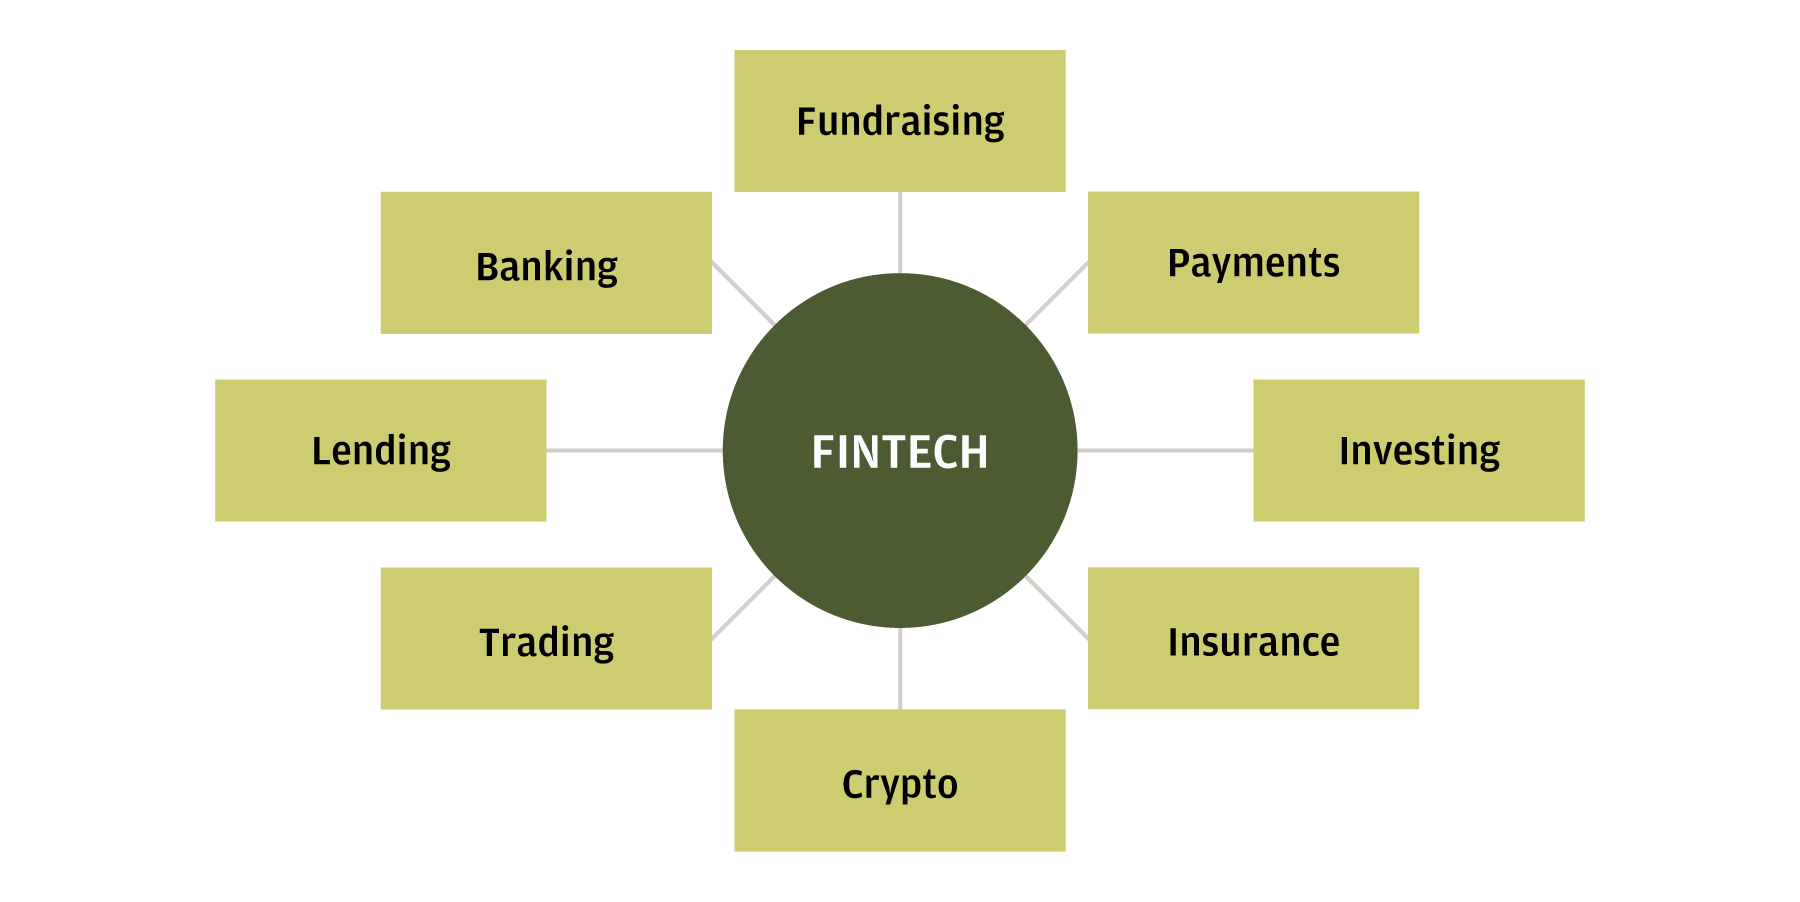 The flow charts illustrates the different components of our financial lives that Fintech is transforming, including payments, banking, lending, trading, investing, insurance, fundraising and crypto.